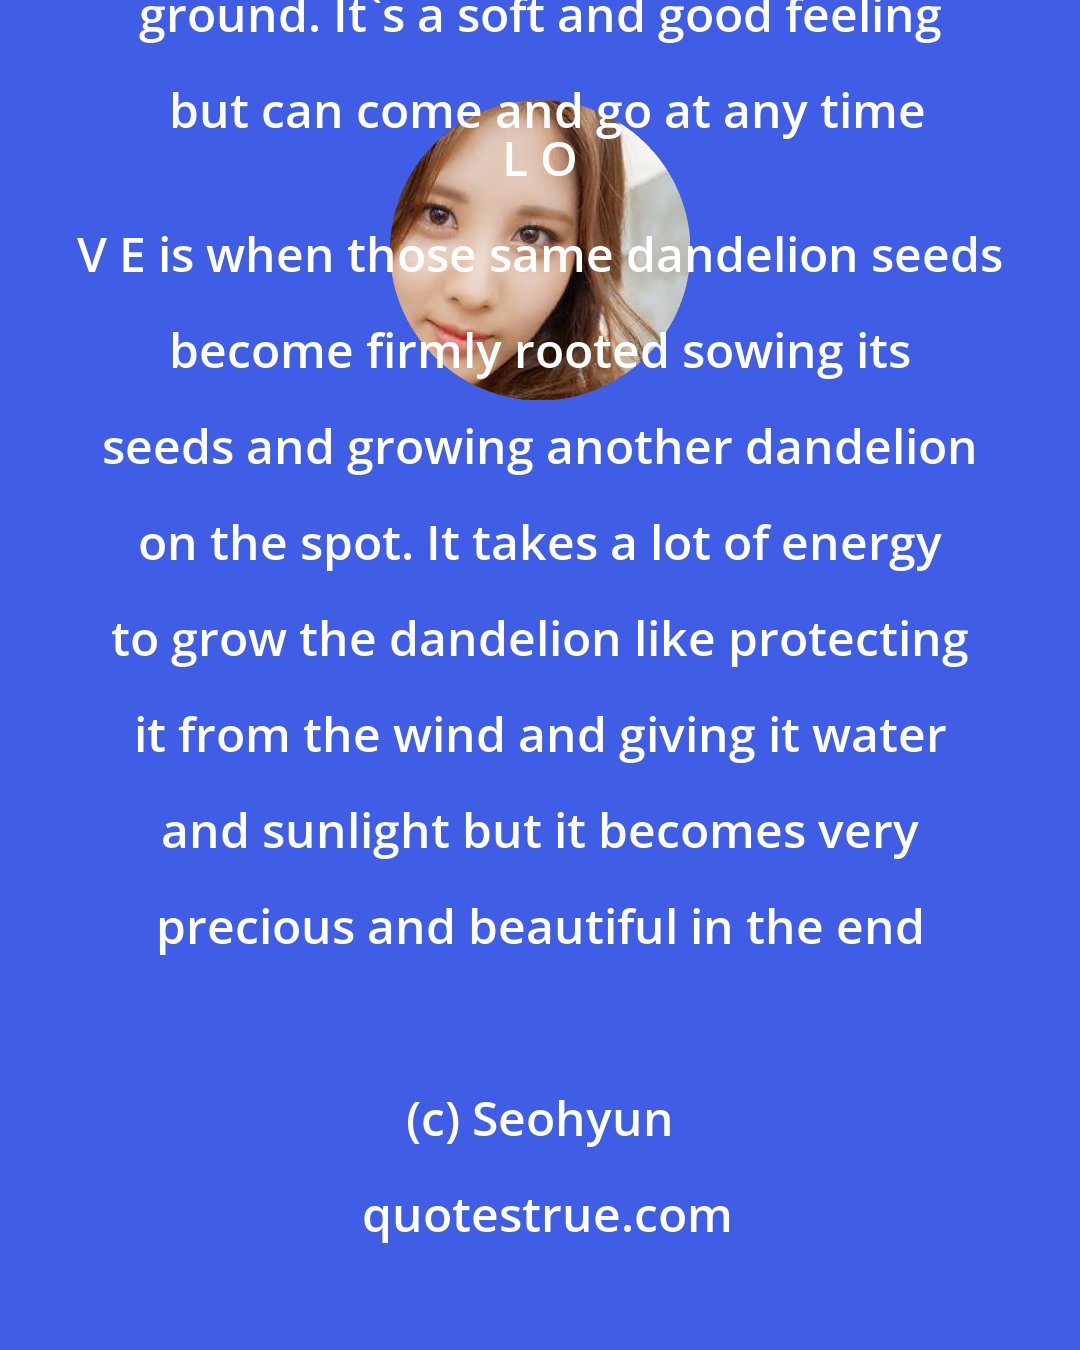 Seohyun: L I K E is like a bunch of dandelion seeds falling beautifully on the ground. It's a soft and good feeling but can come and go at any time
 L O V E is when those same dandelion seeds become firmly rooted sowing its seeds and growing another dandelion on the spot. It takes a lot of energy to grow the dandelion like protecting it from the wind and giving it water and sunlight but it becomes very precious and beautiful in the end